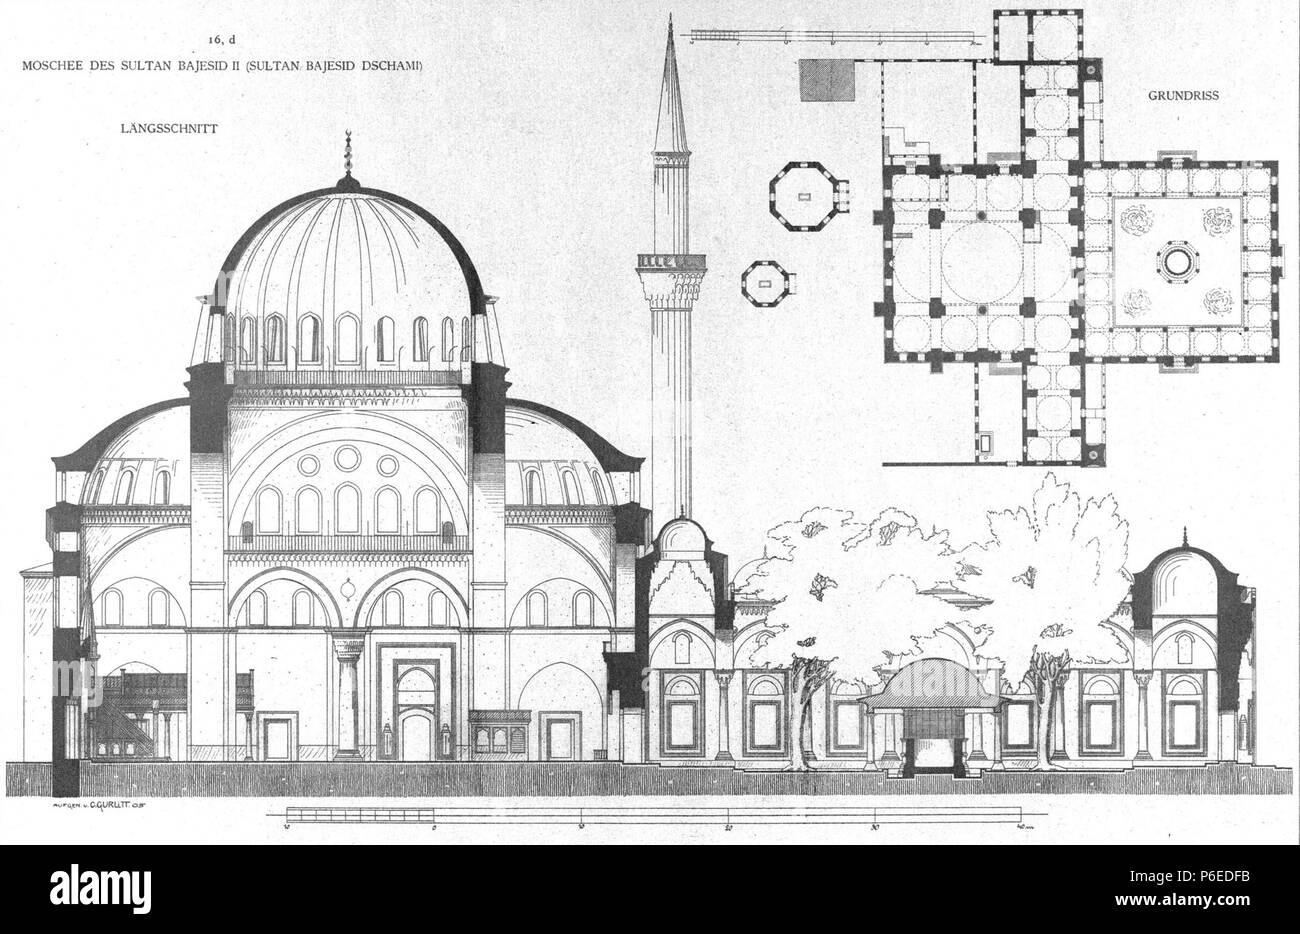 English: Elevation and plan of the Bayezid II Mosque in Istanbul . 1912 7 Bayezid II Mosque by Gurlitt 1912 Stock Photo